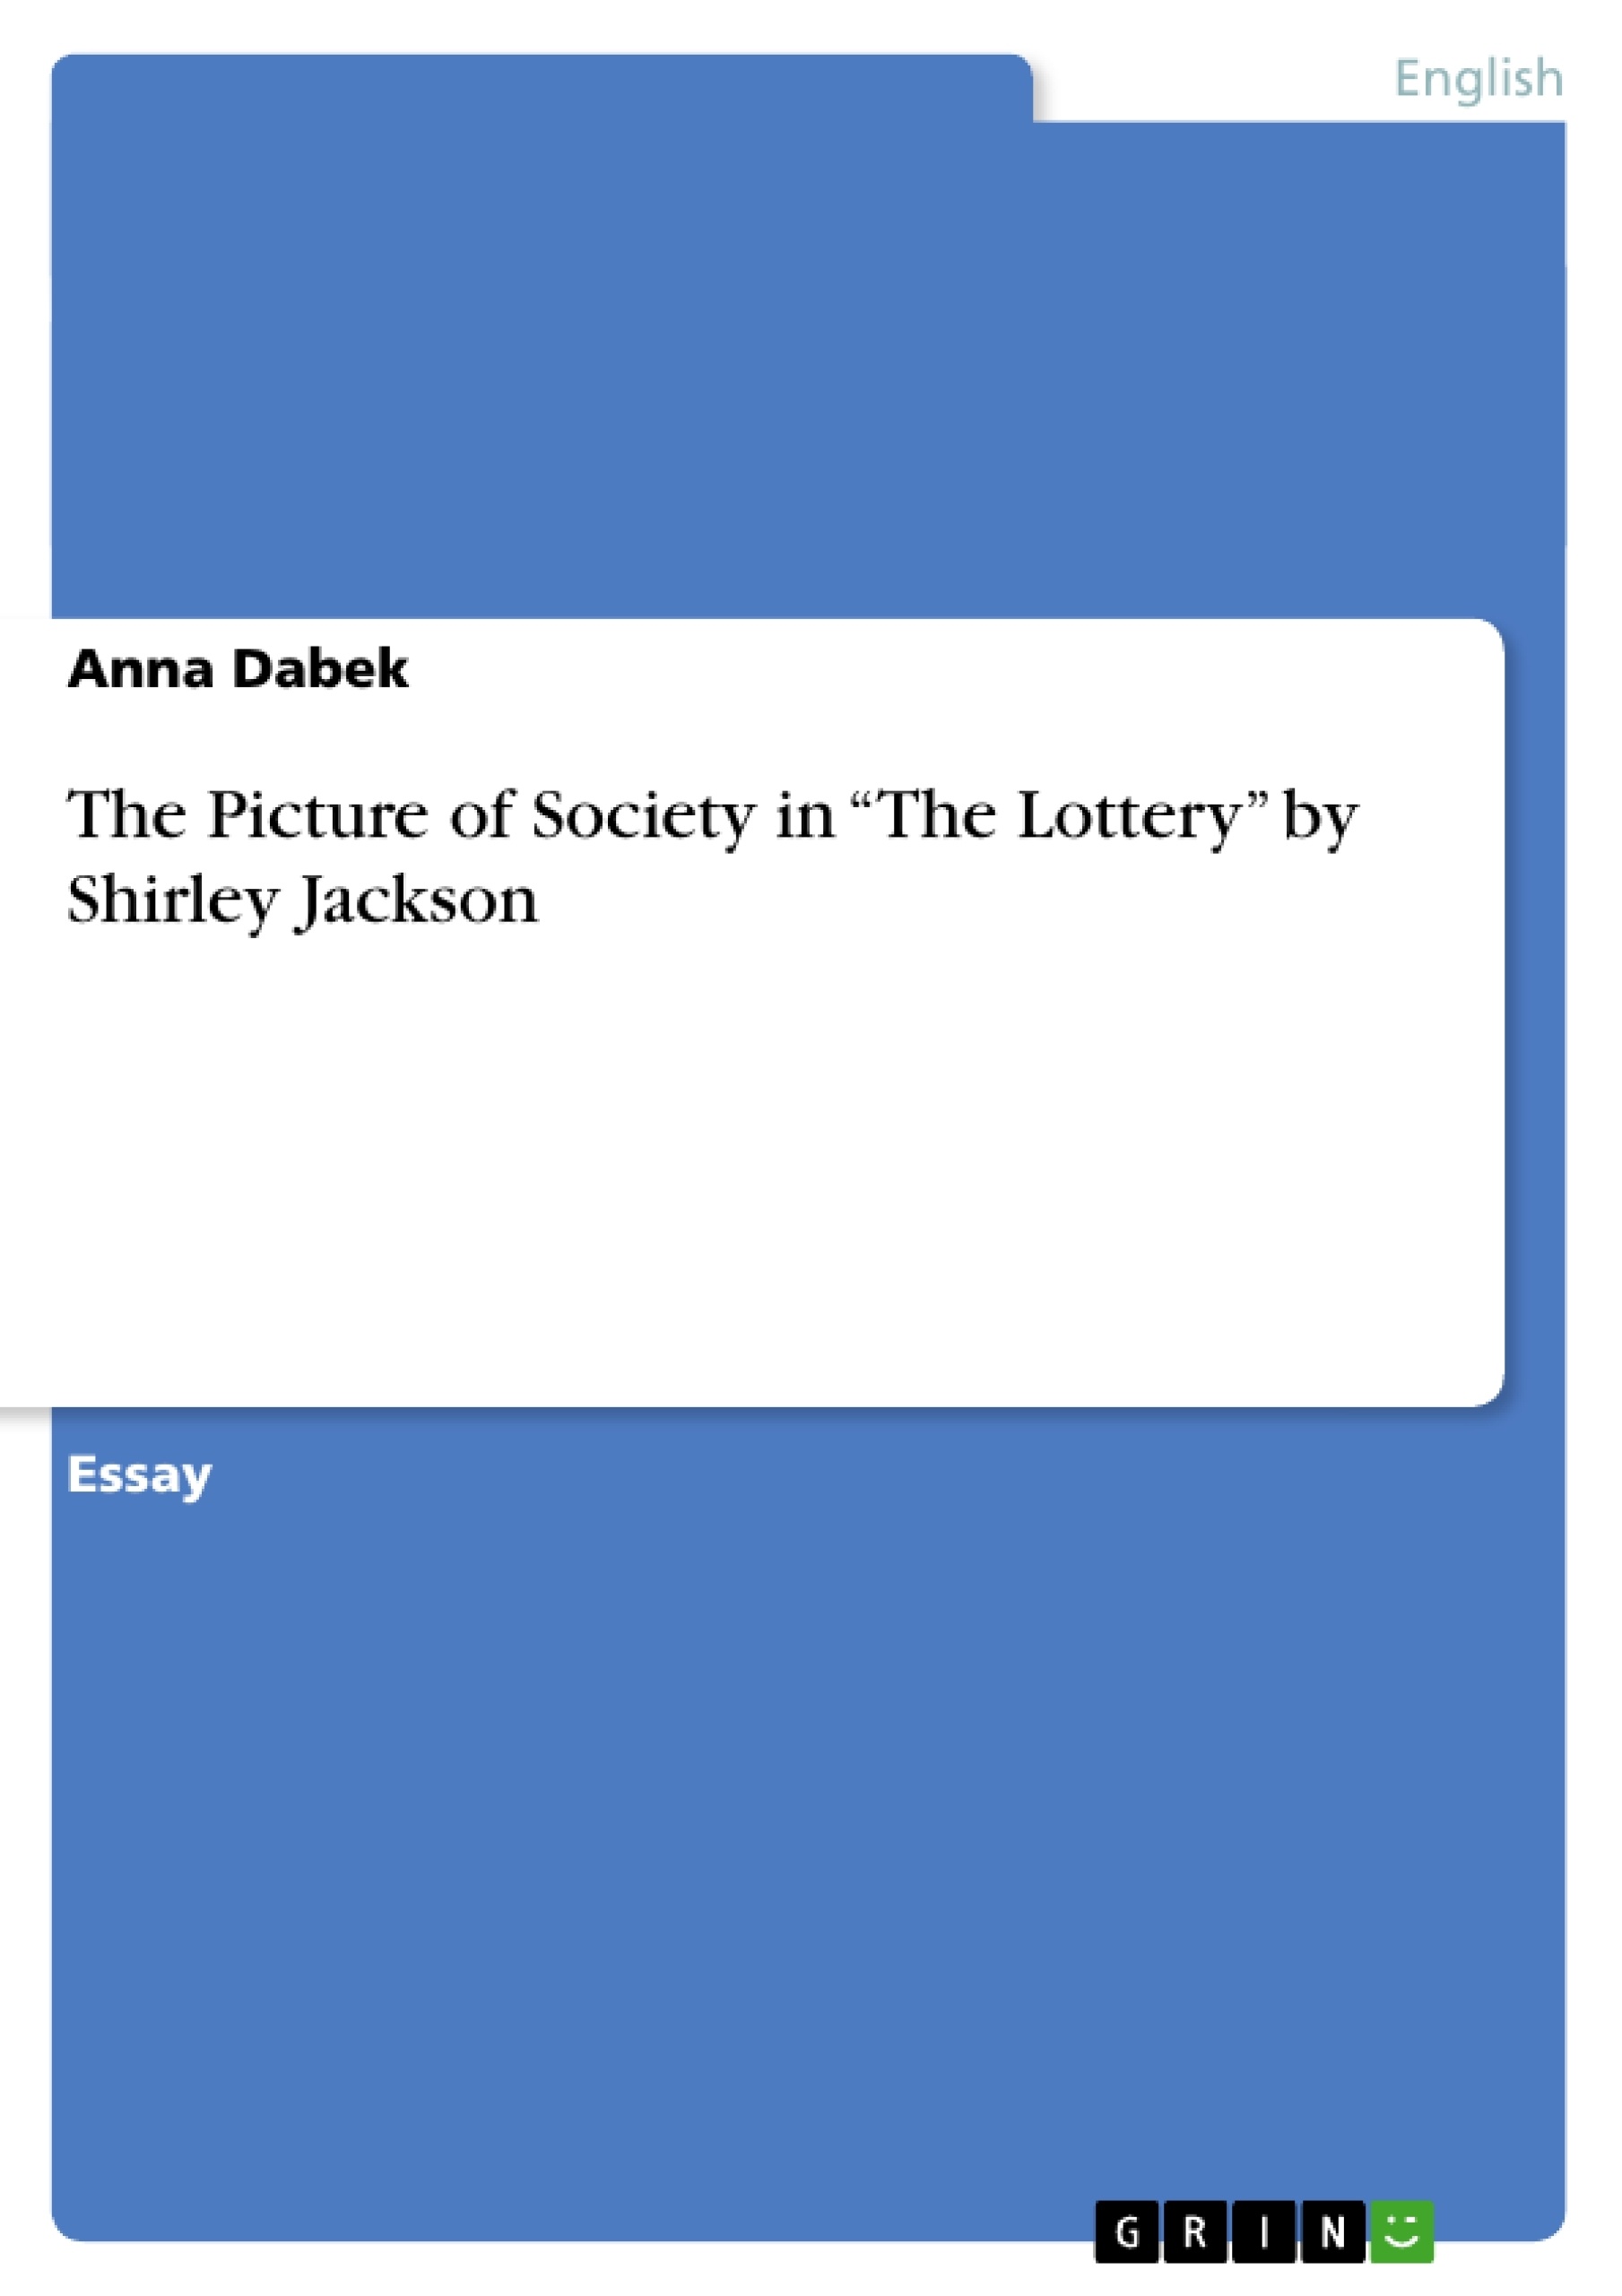 Реферат: Shirley JacksonS The Lottery Essay Research Paper